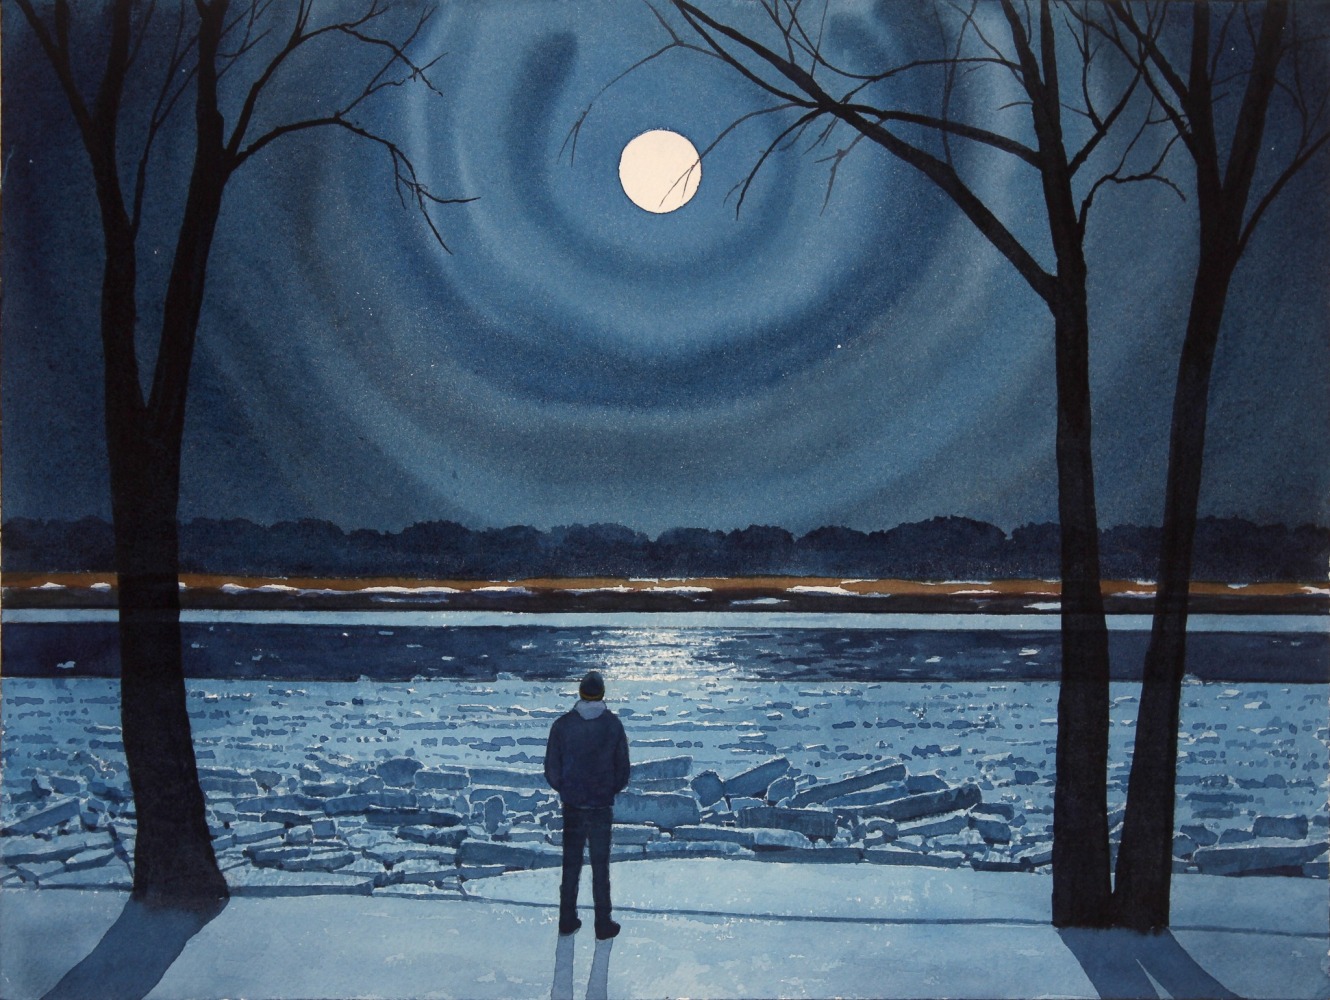 Tim Gardner

Man in Moonlight, Red River

2020

Watercolor on paper

12 1/8&amp;nbsp; x 16 1/8 inches (30.8 x 41 cm)

TG 591

&amp;nbsp;

INQUIRE